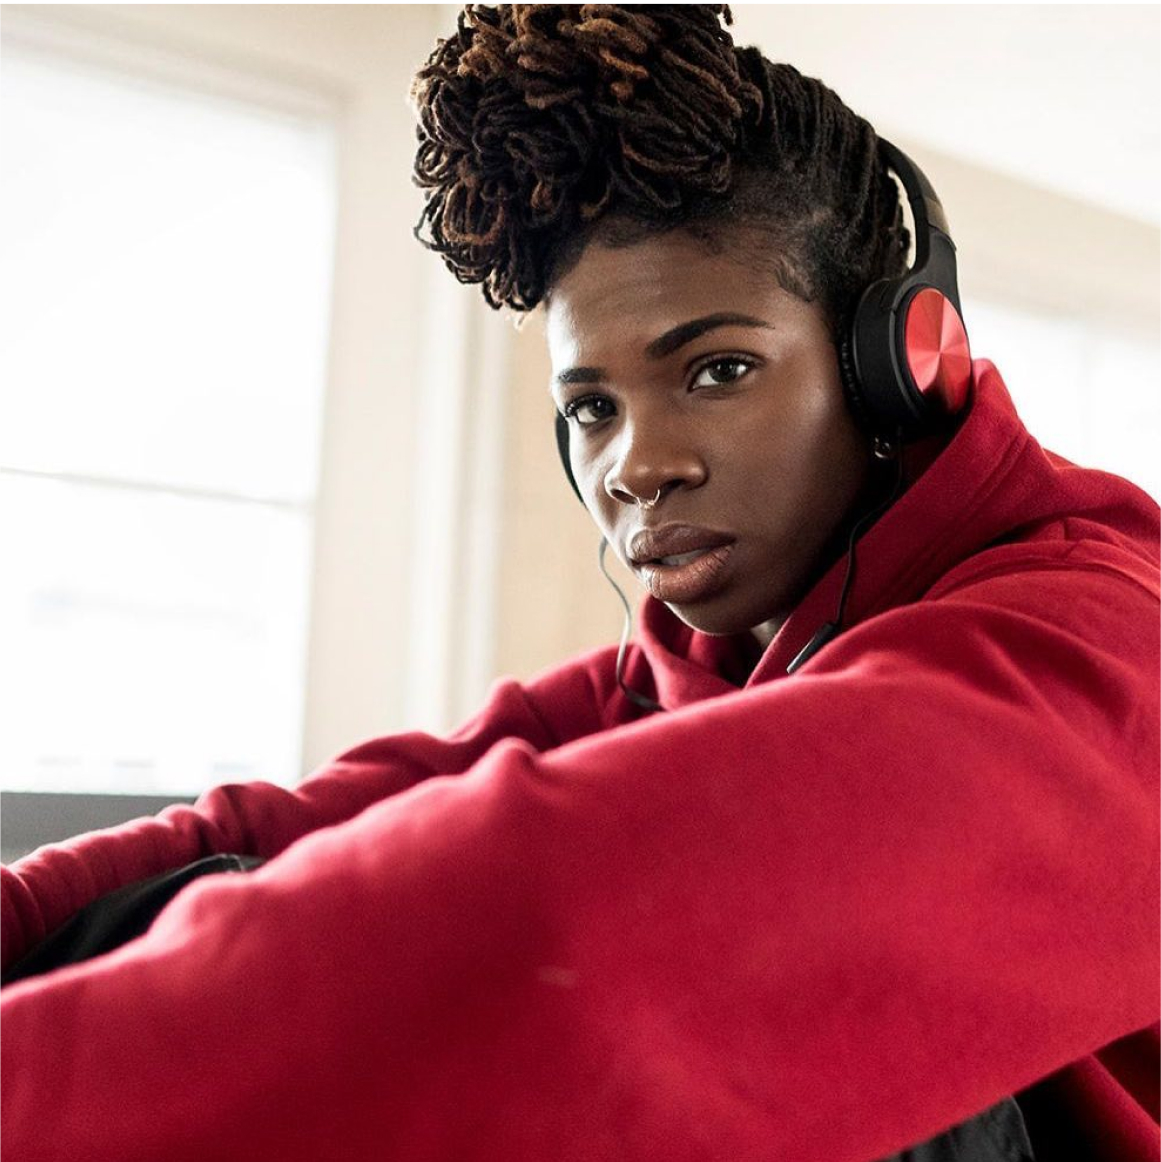 Woman in red sweatshirt with red and black on-ear headphones looks into the distance